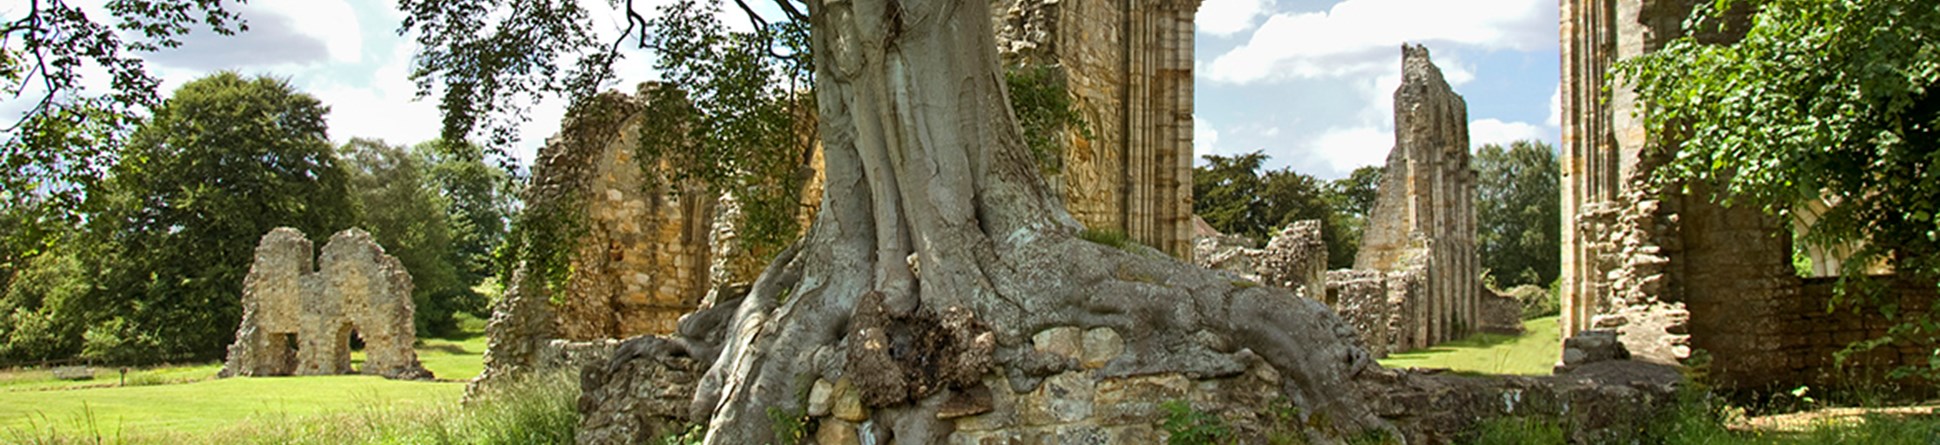 A large tree with roots growing over stonework, and ruins in the background.